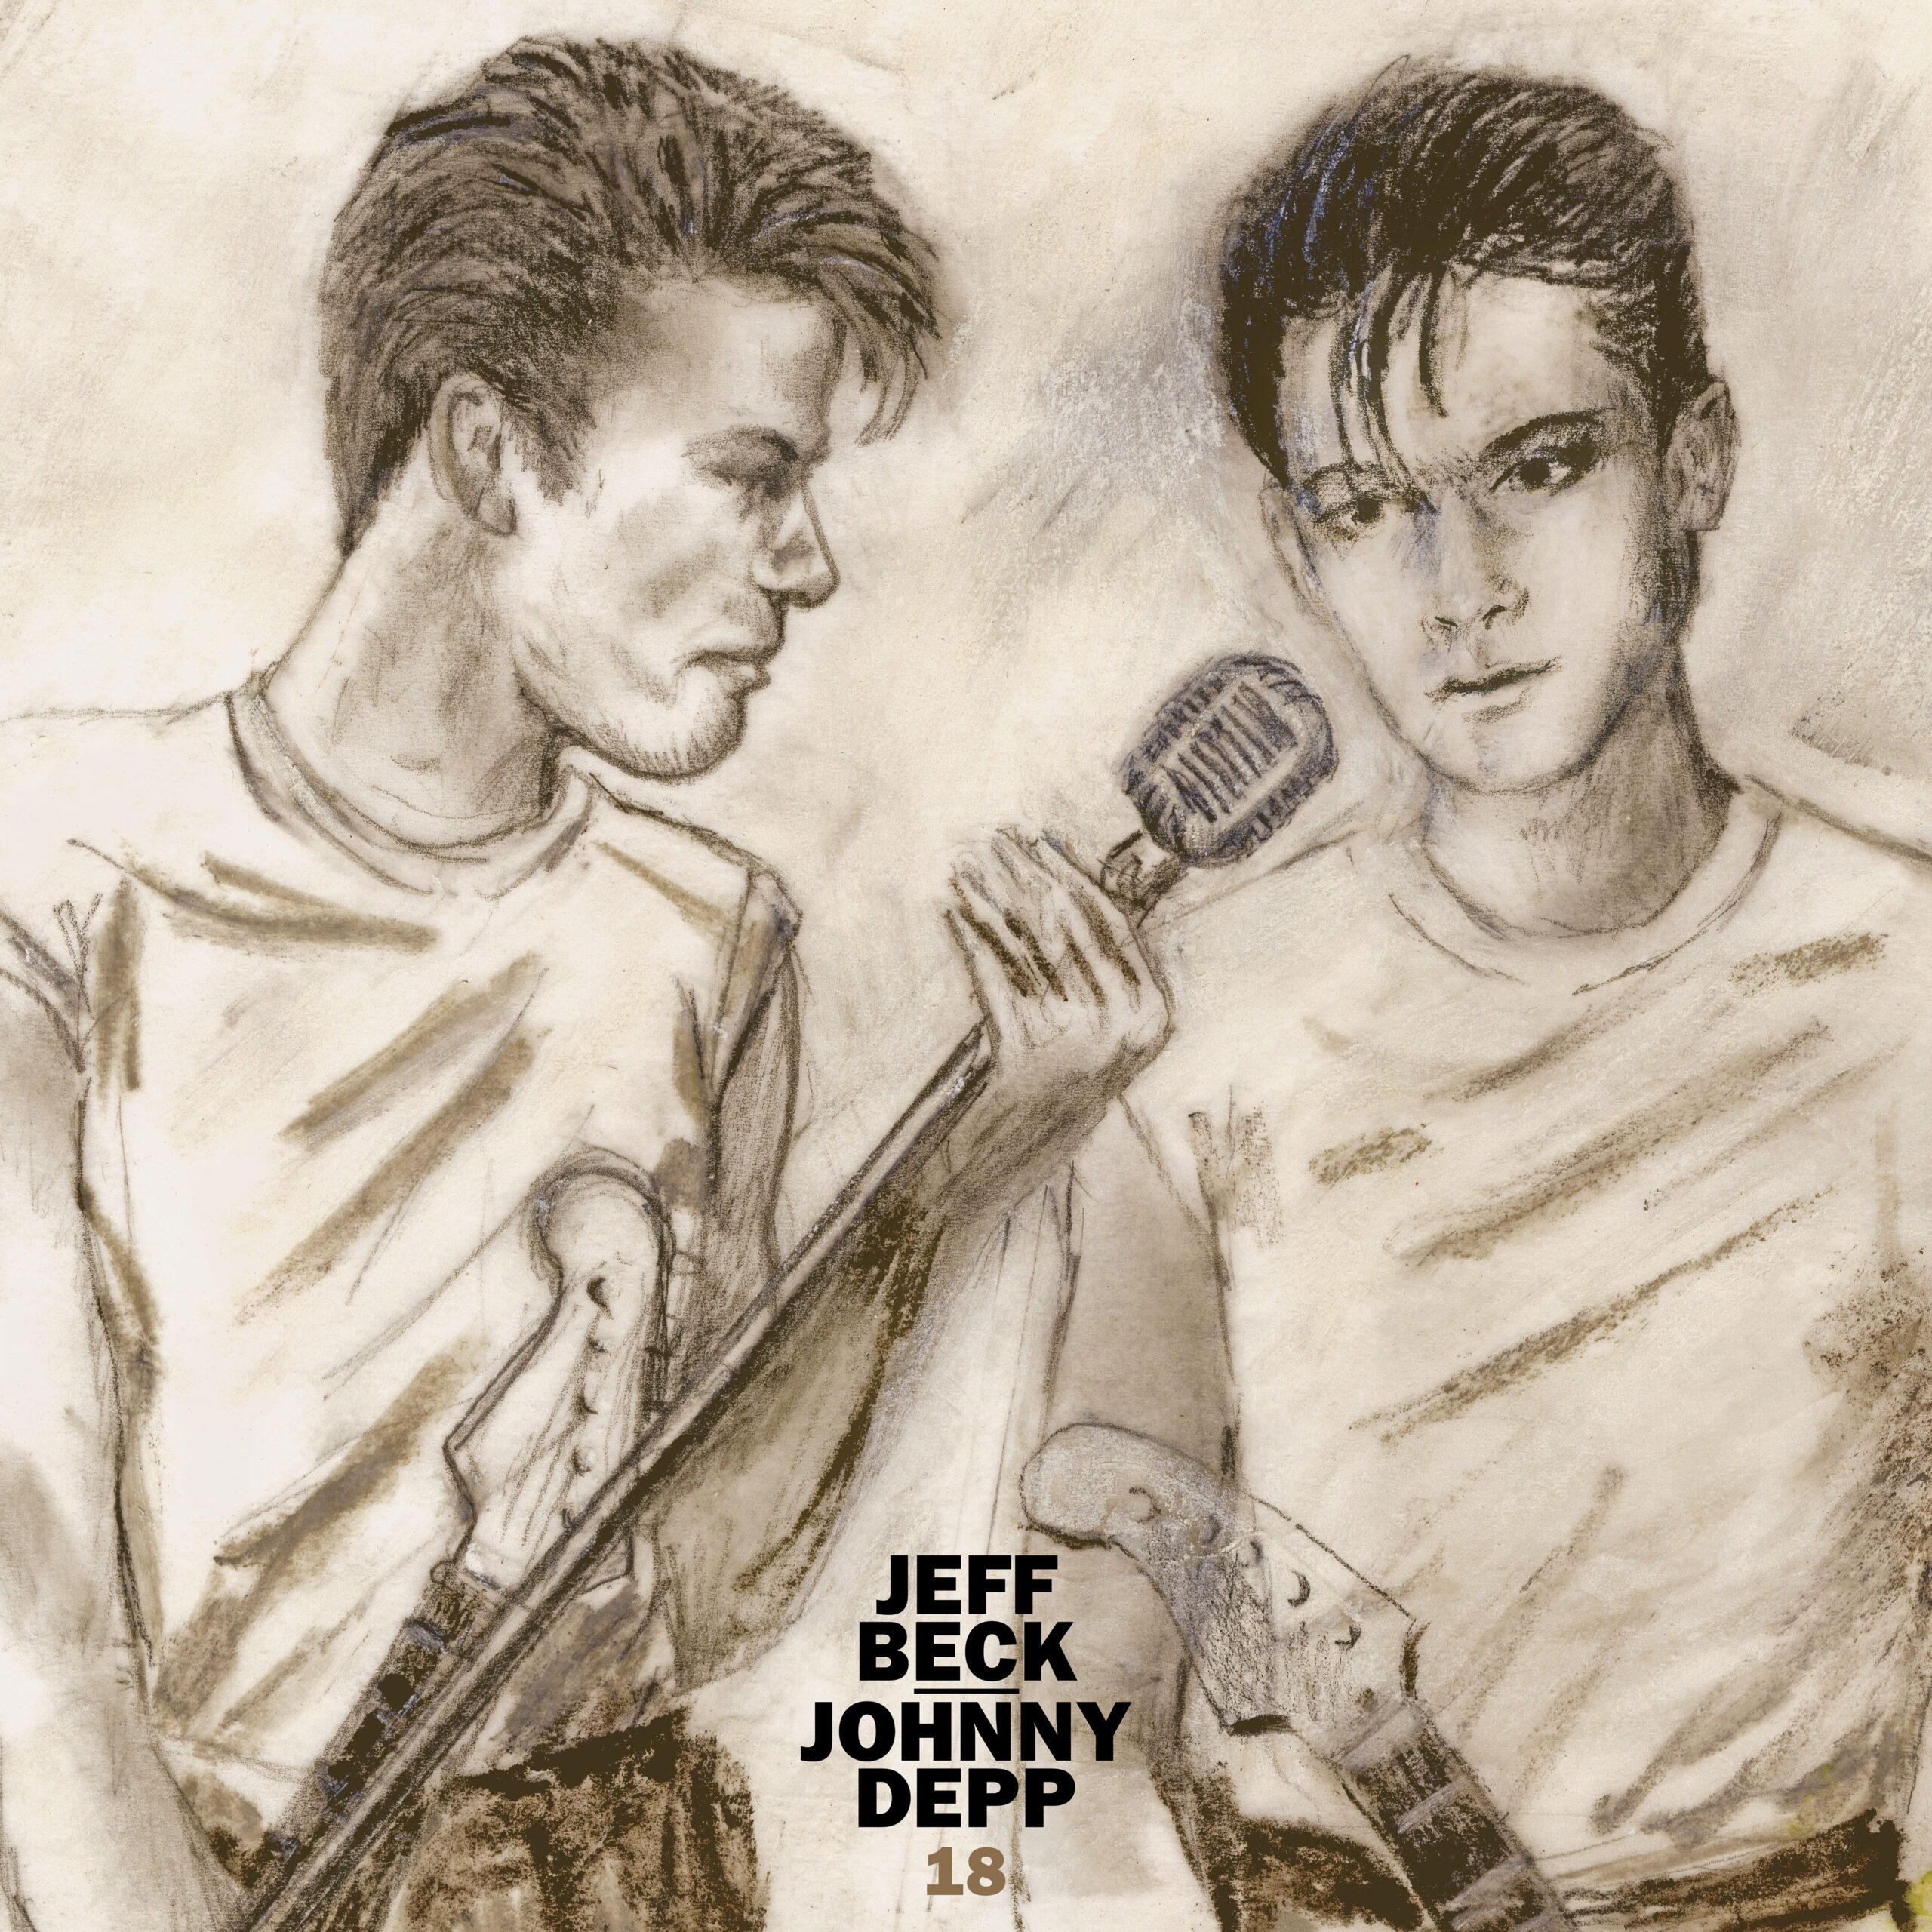 Jeff Beck and Johnny Depp "18"